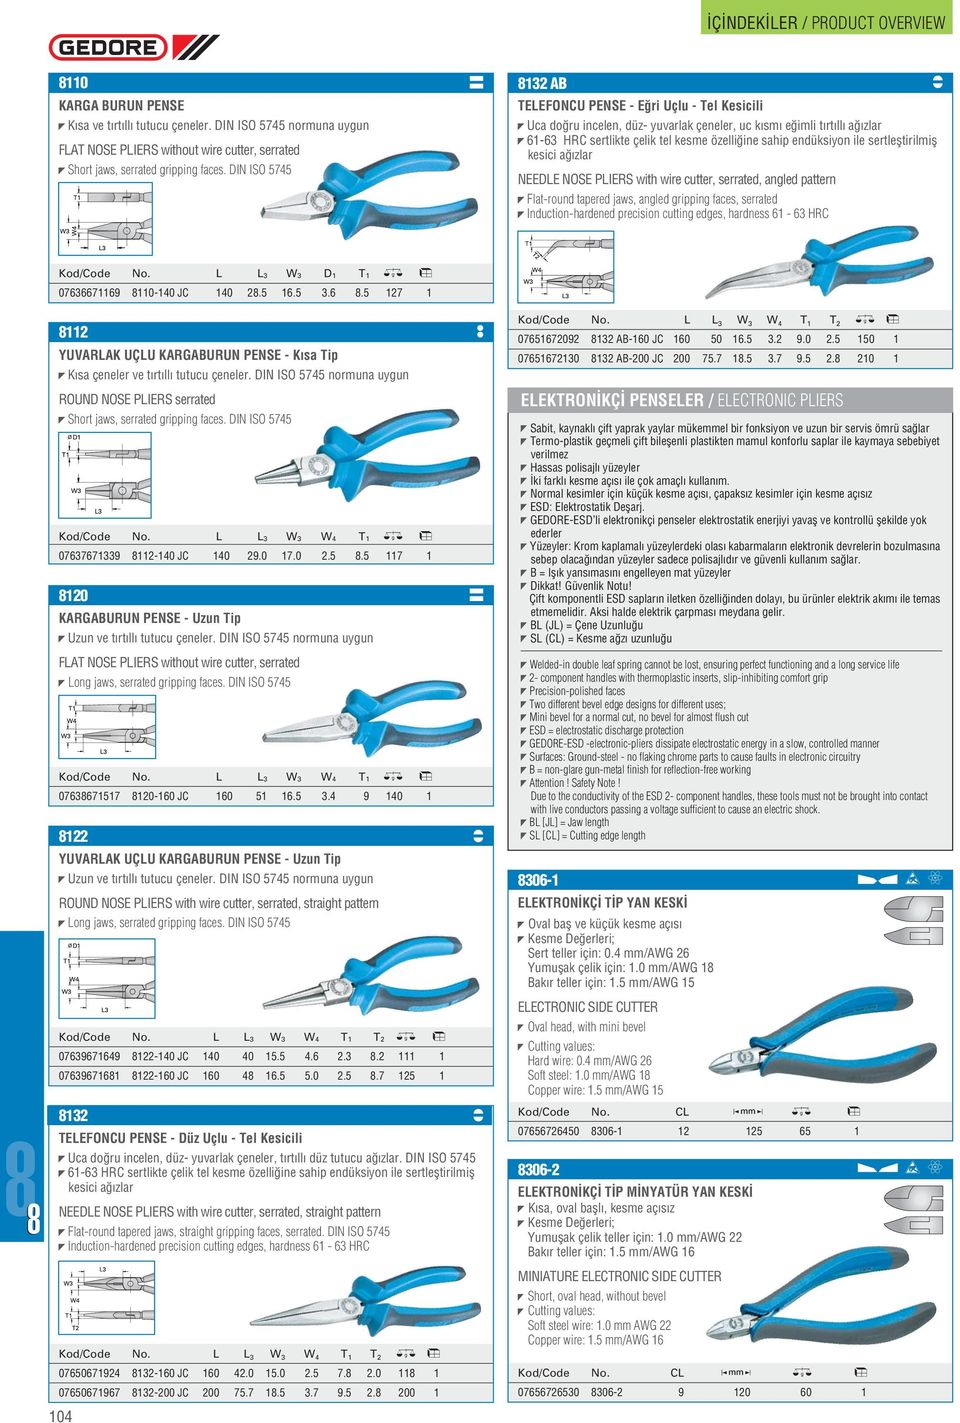 endüksiyon ile sertlefltirilmifl kesici a zlar NEEDLE NOSE PLIERS with wire cutter, serrated, angled pattern Flat-round tapered jaws, angled gripping faces, serrated Induction-hardened precision